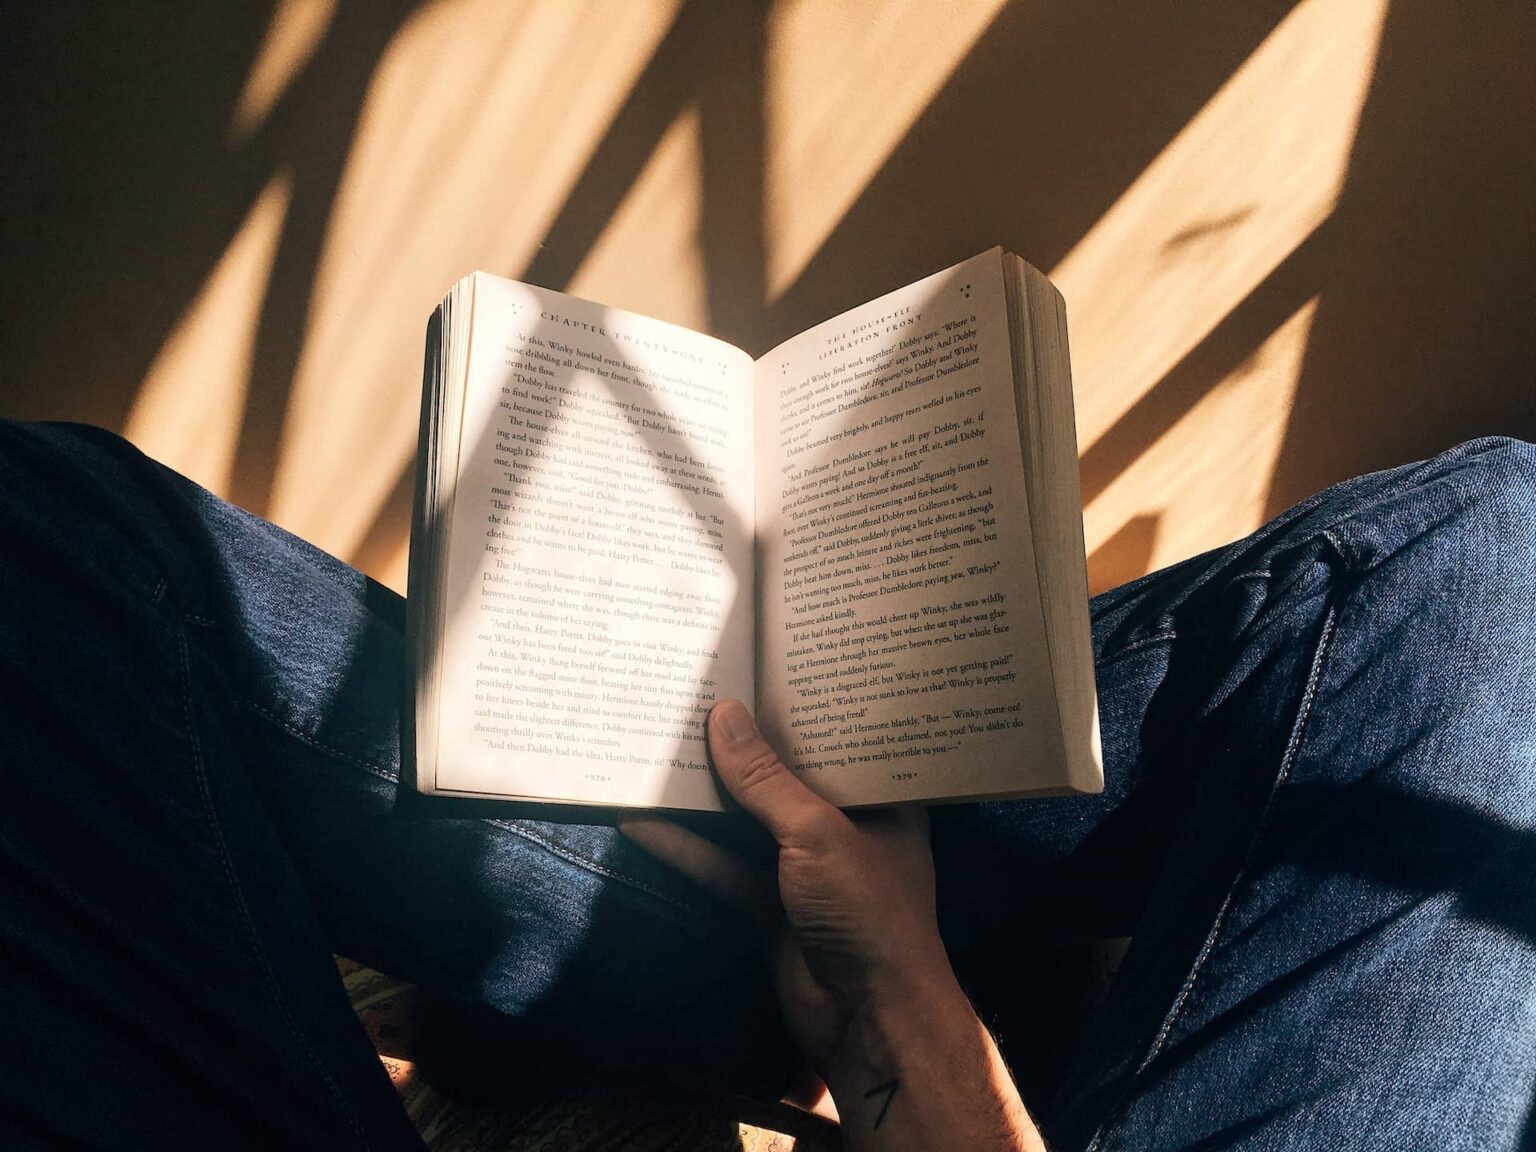 A person holding an open book.